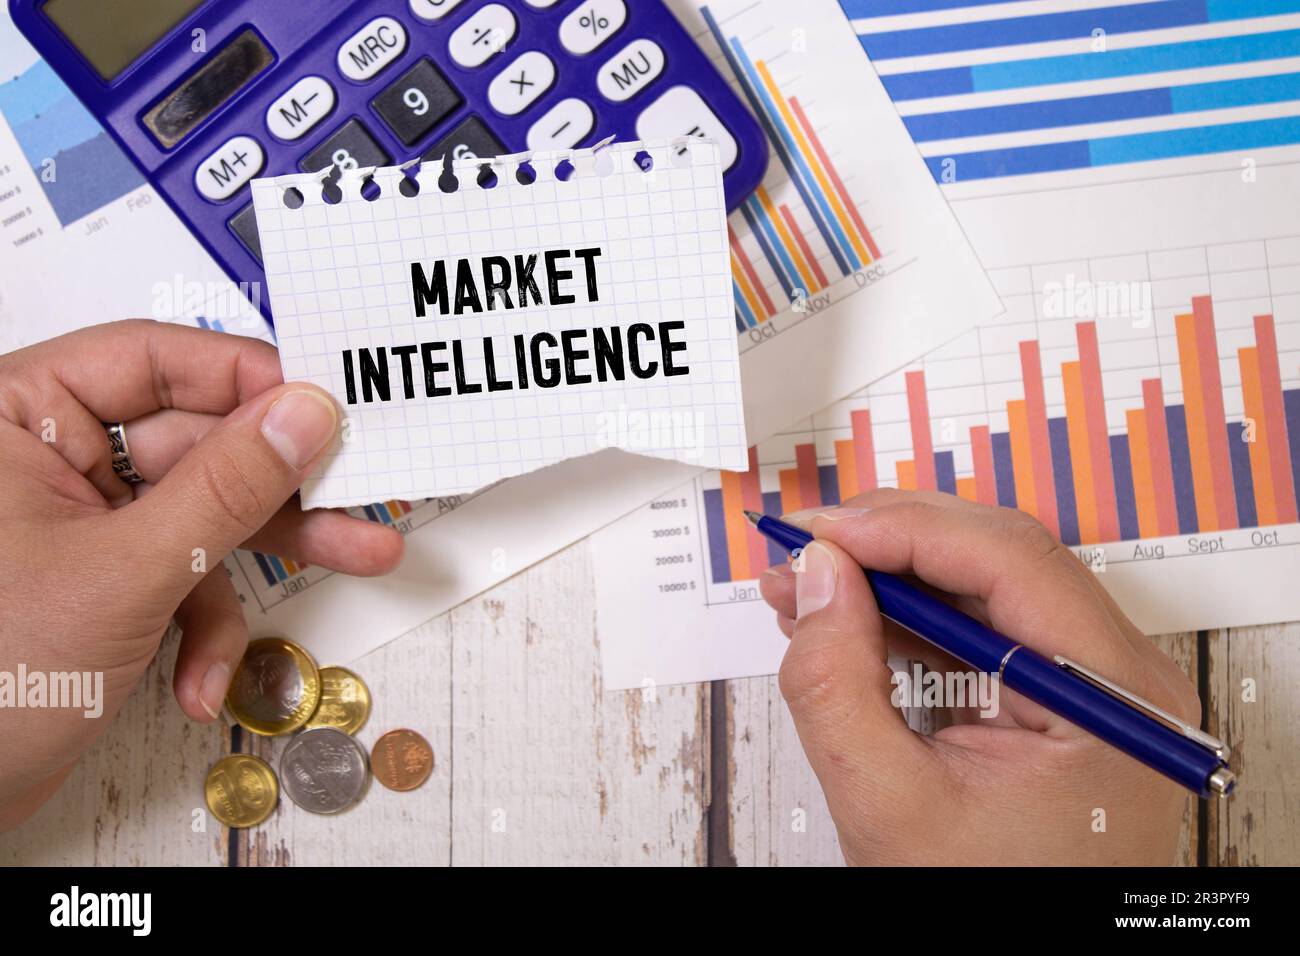 MARKET INTELLIGENCE word on the yellow paper with office tools on white background. Stock Photo